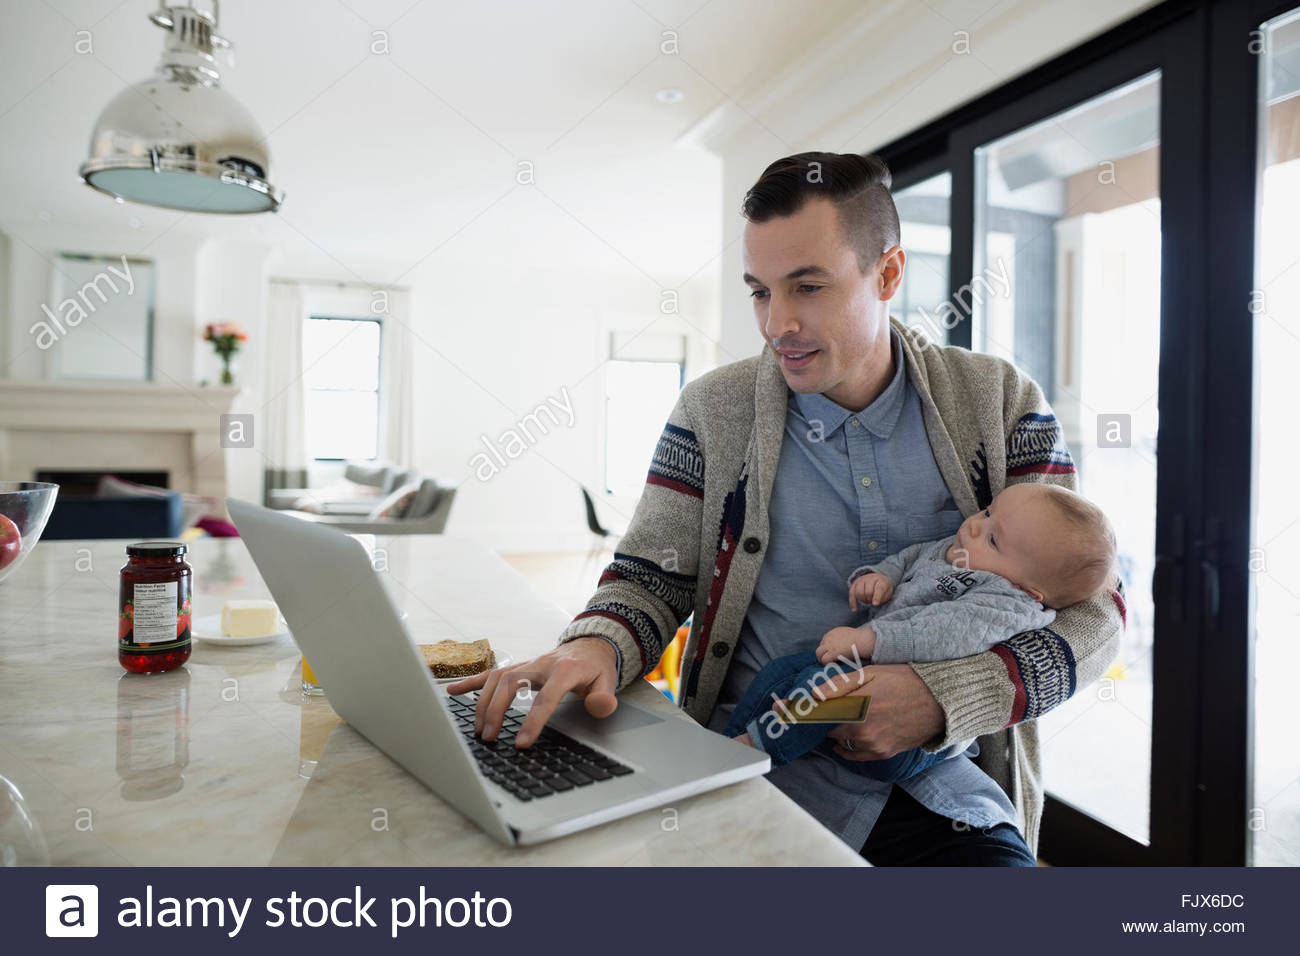 Father holding baby son and working at laptop Stock Photo